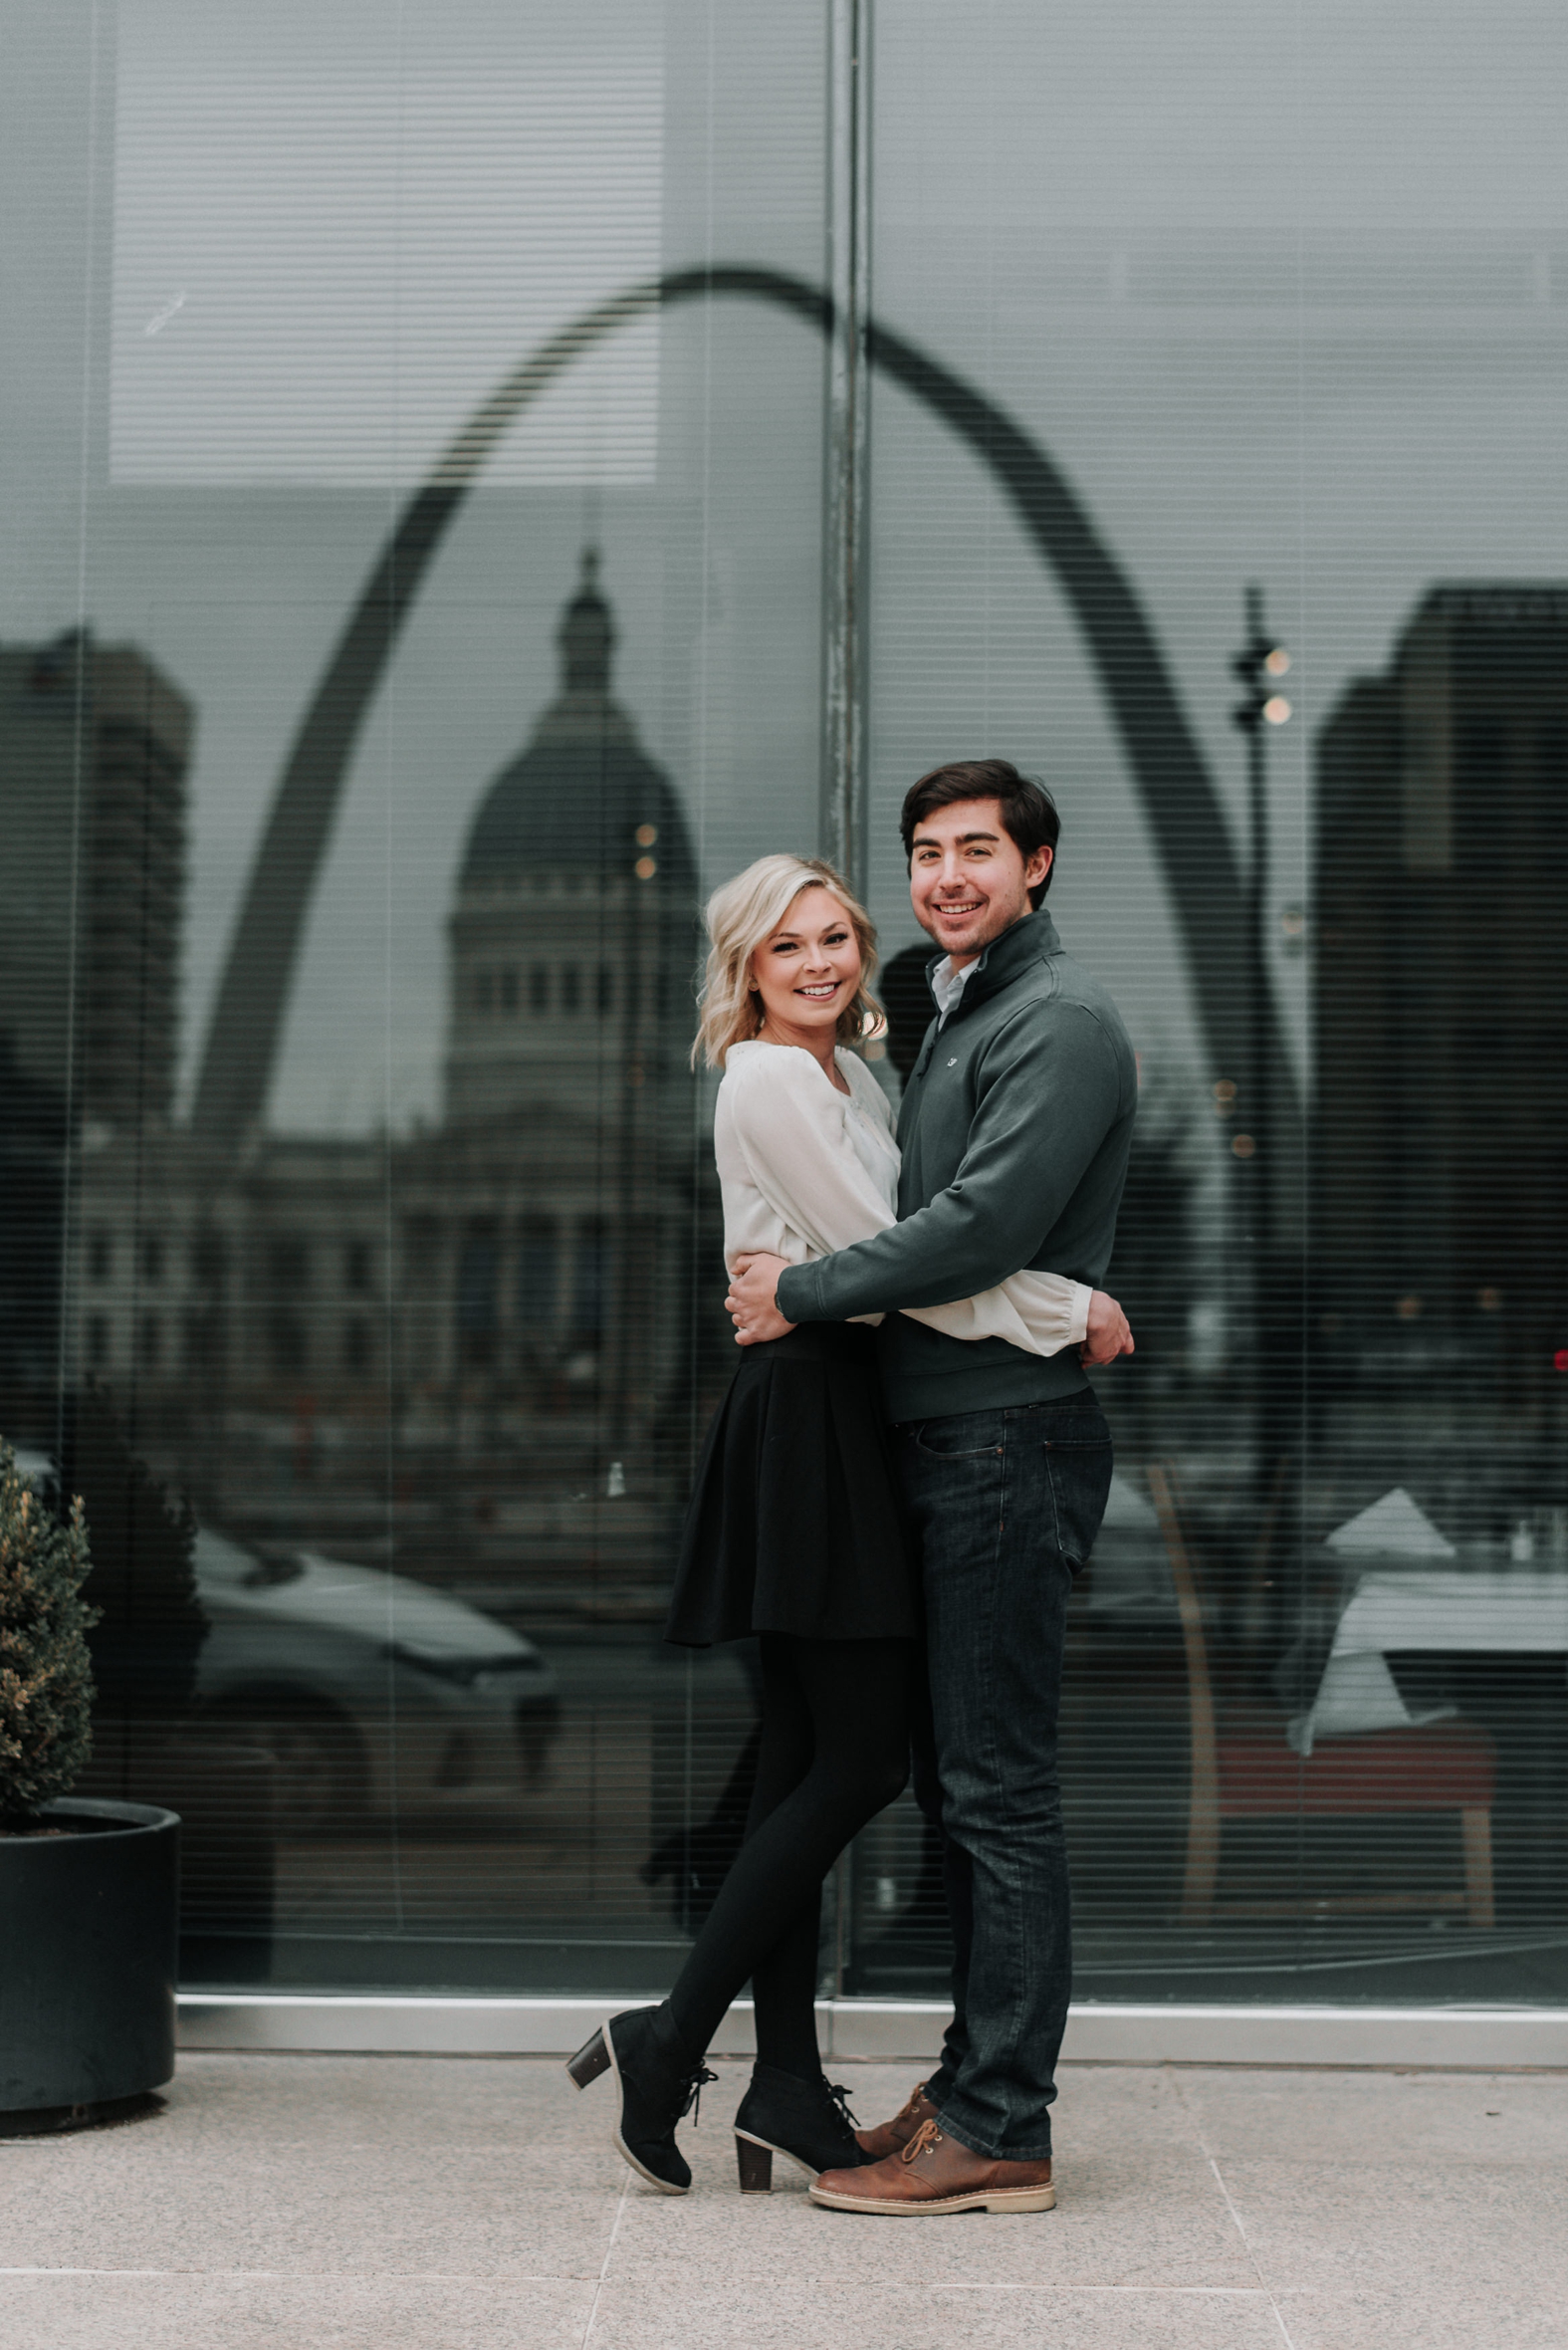 Bride and groom to be hug tightly in front of the reflection of the Gateway Arch in downtown St. Louis during their winter engagement photo shoot.